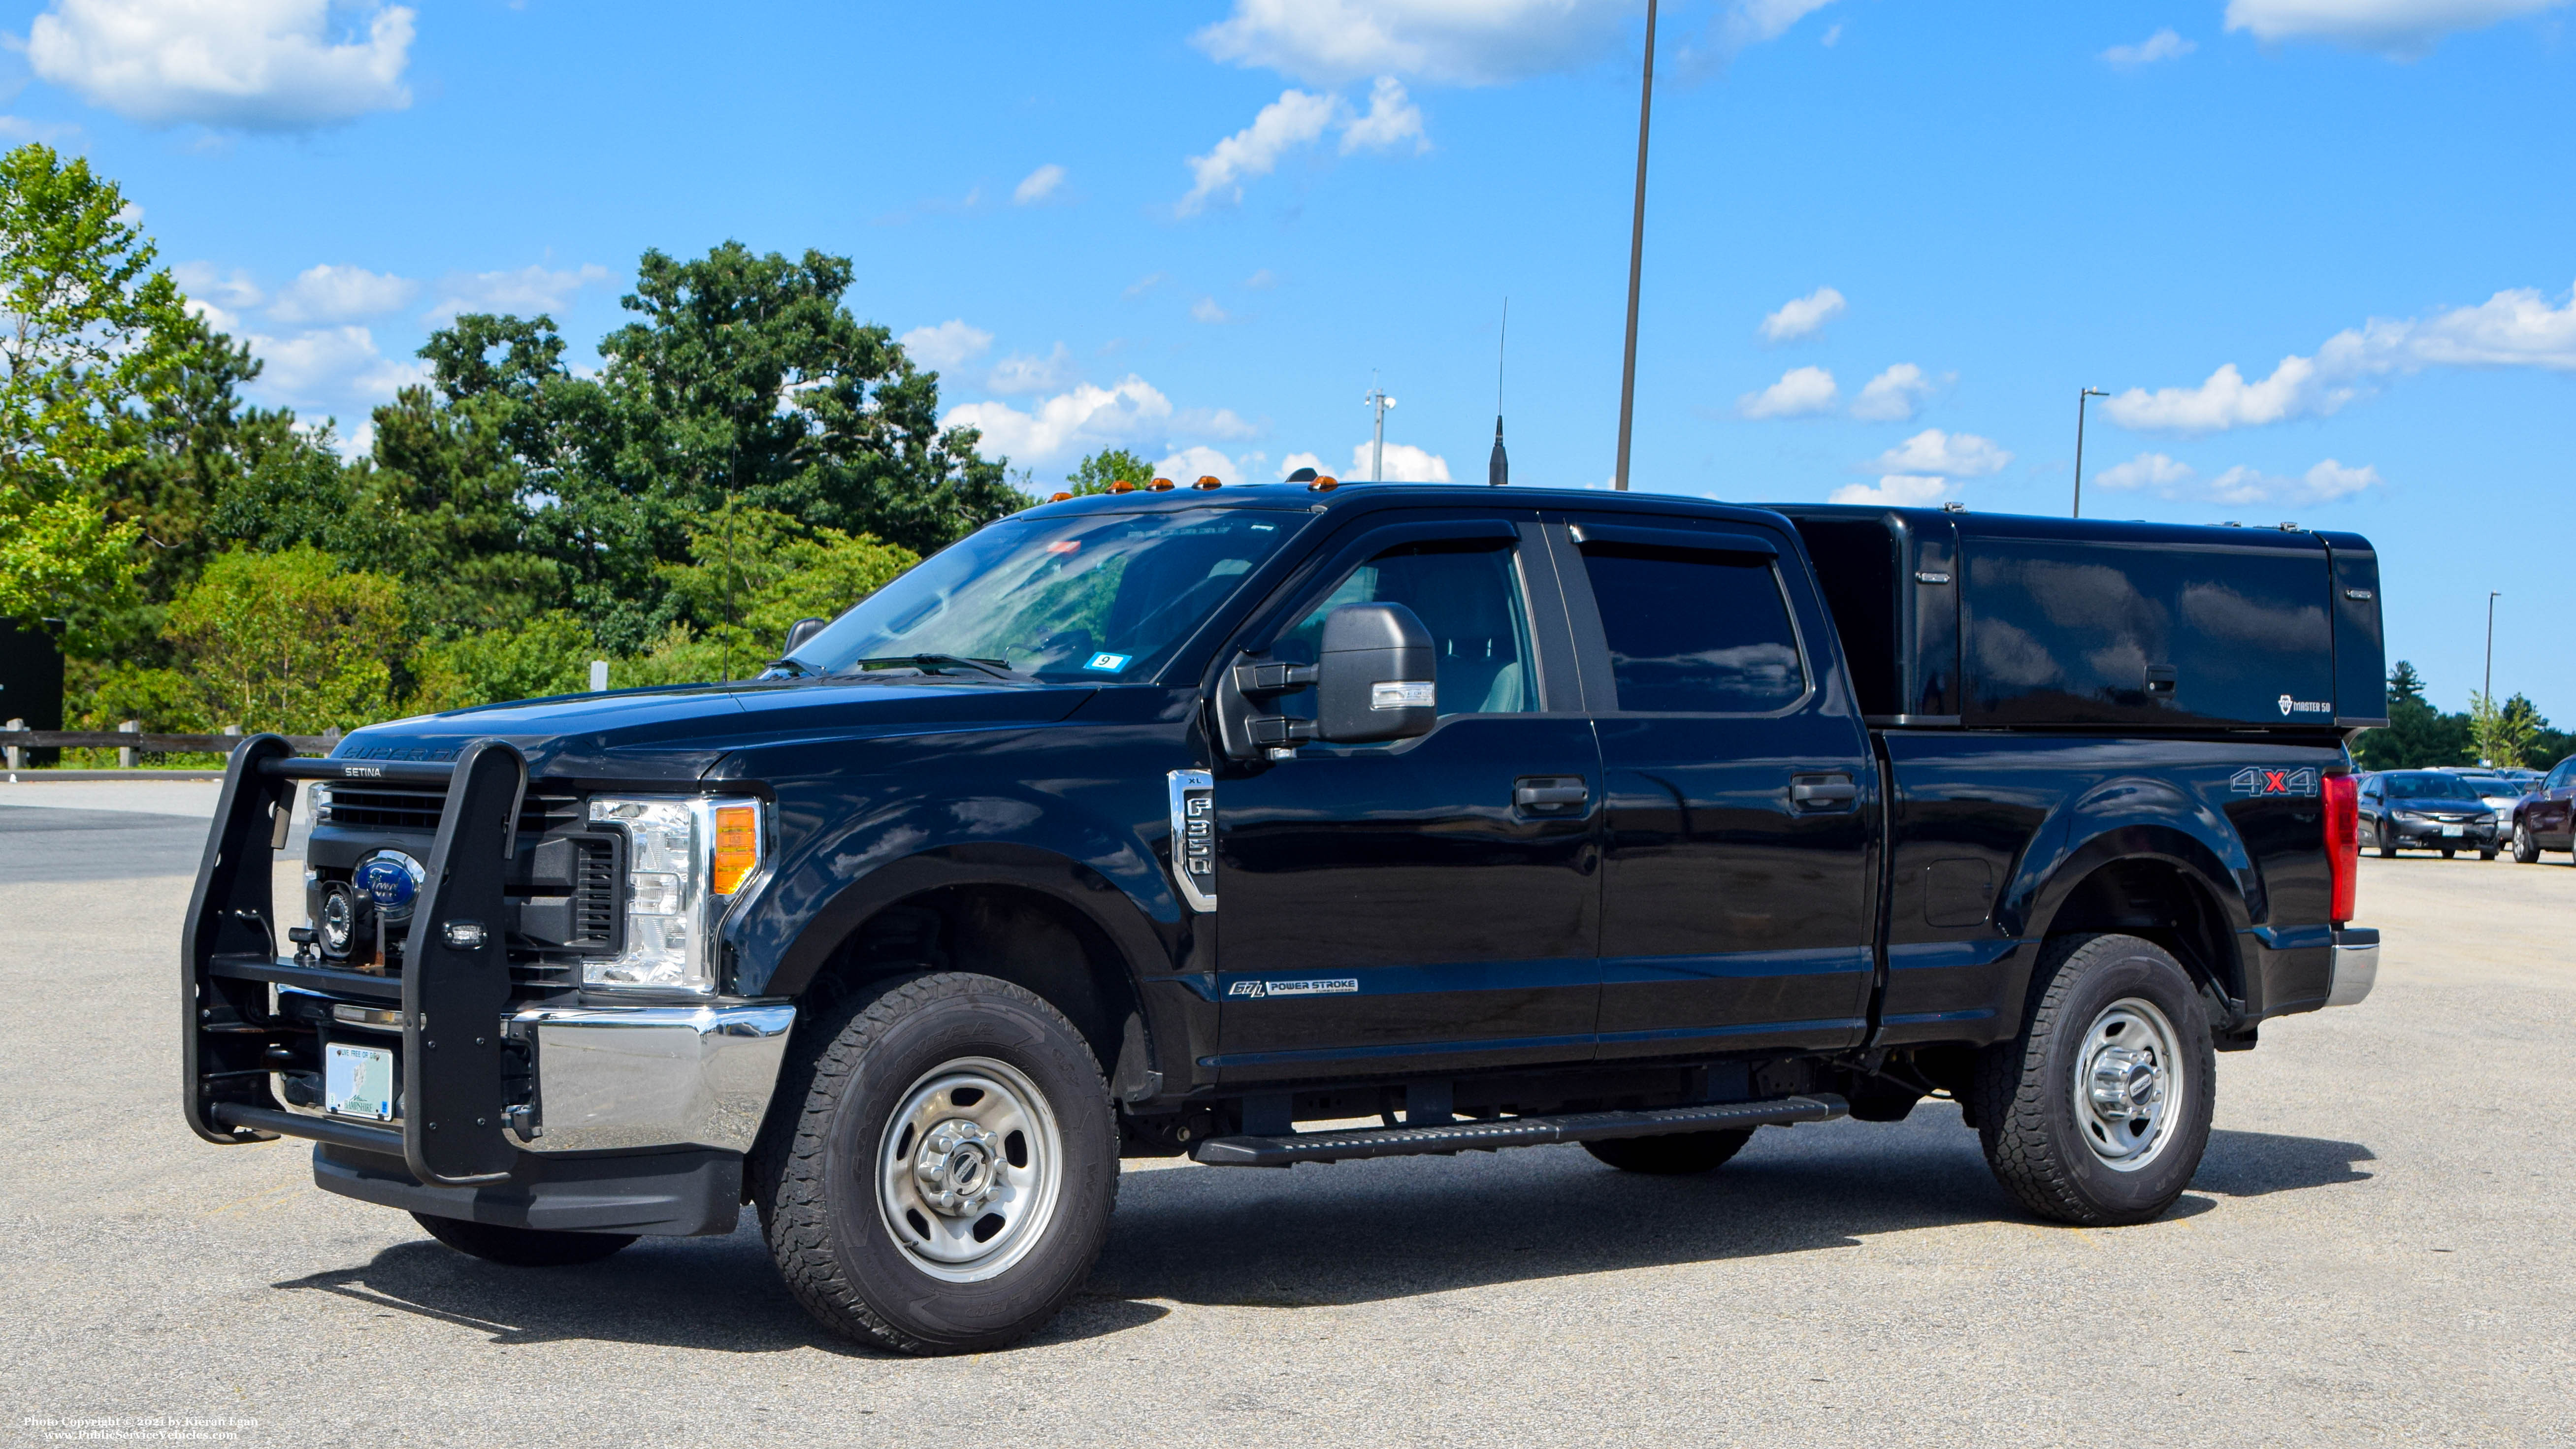 A photo  of New Hampshire State Police
            Cruiser 86, a 2017 Ford F-350 Crew Cab             taken by Kieran Egan